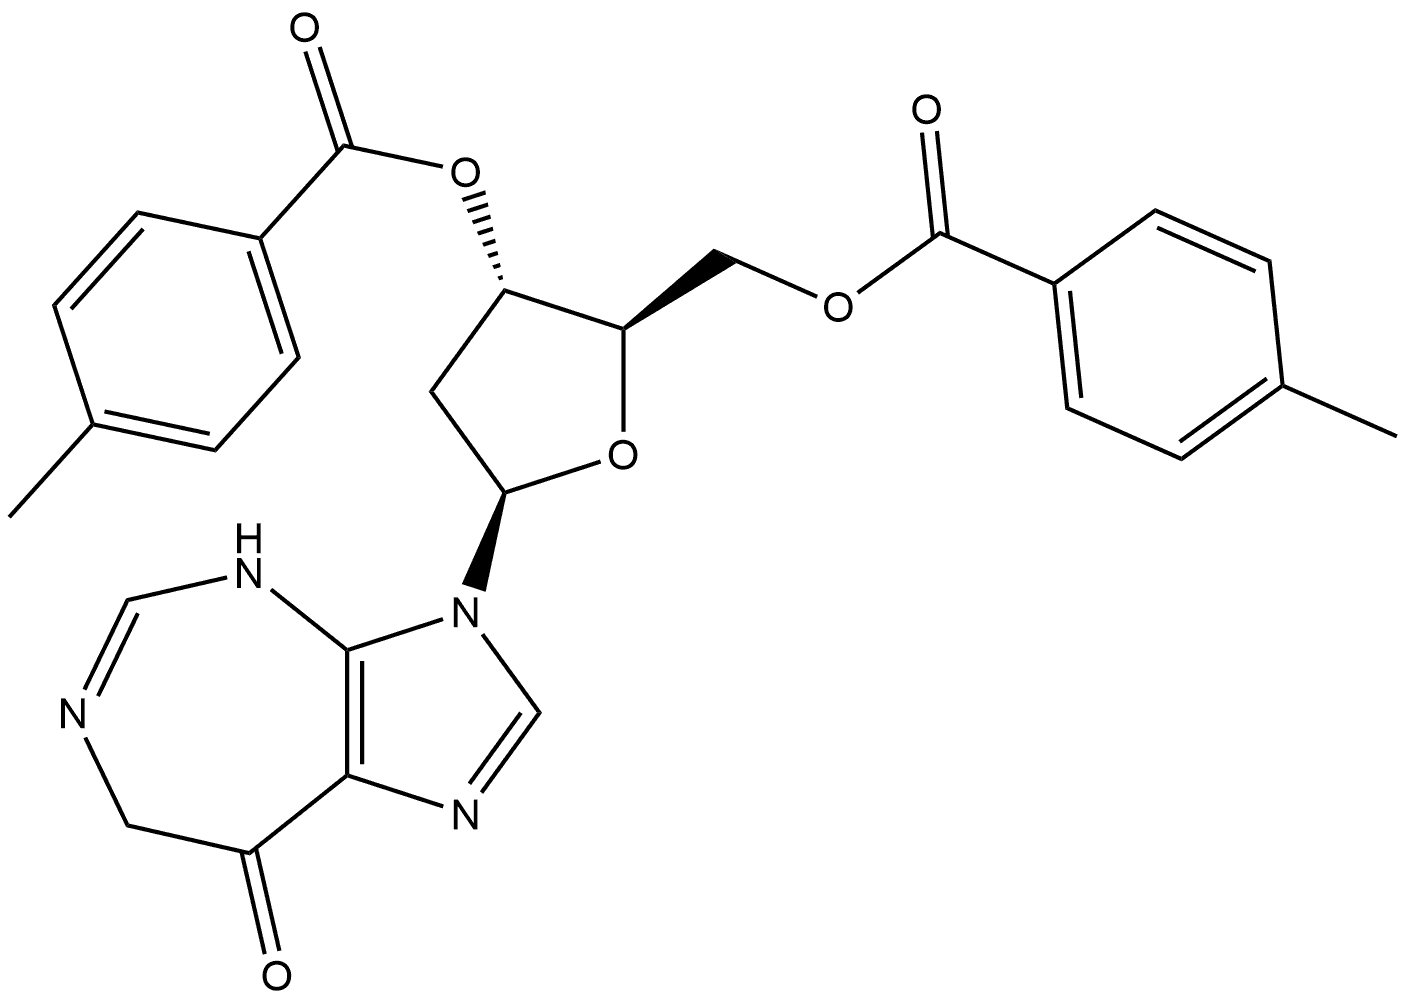 Imidazo[4,5-d][1,3]diazepin-8(3H)-one, 3-[2-deoxy-3,5-bis-O-(4-methylbenzoyl)-β-D-erythro-pentofuranosyl]-4,7-dihydro- Structural Picture